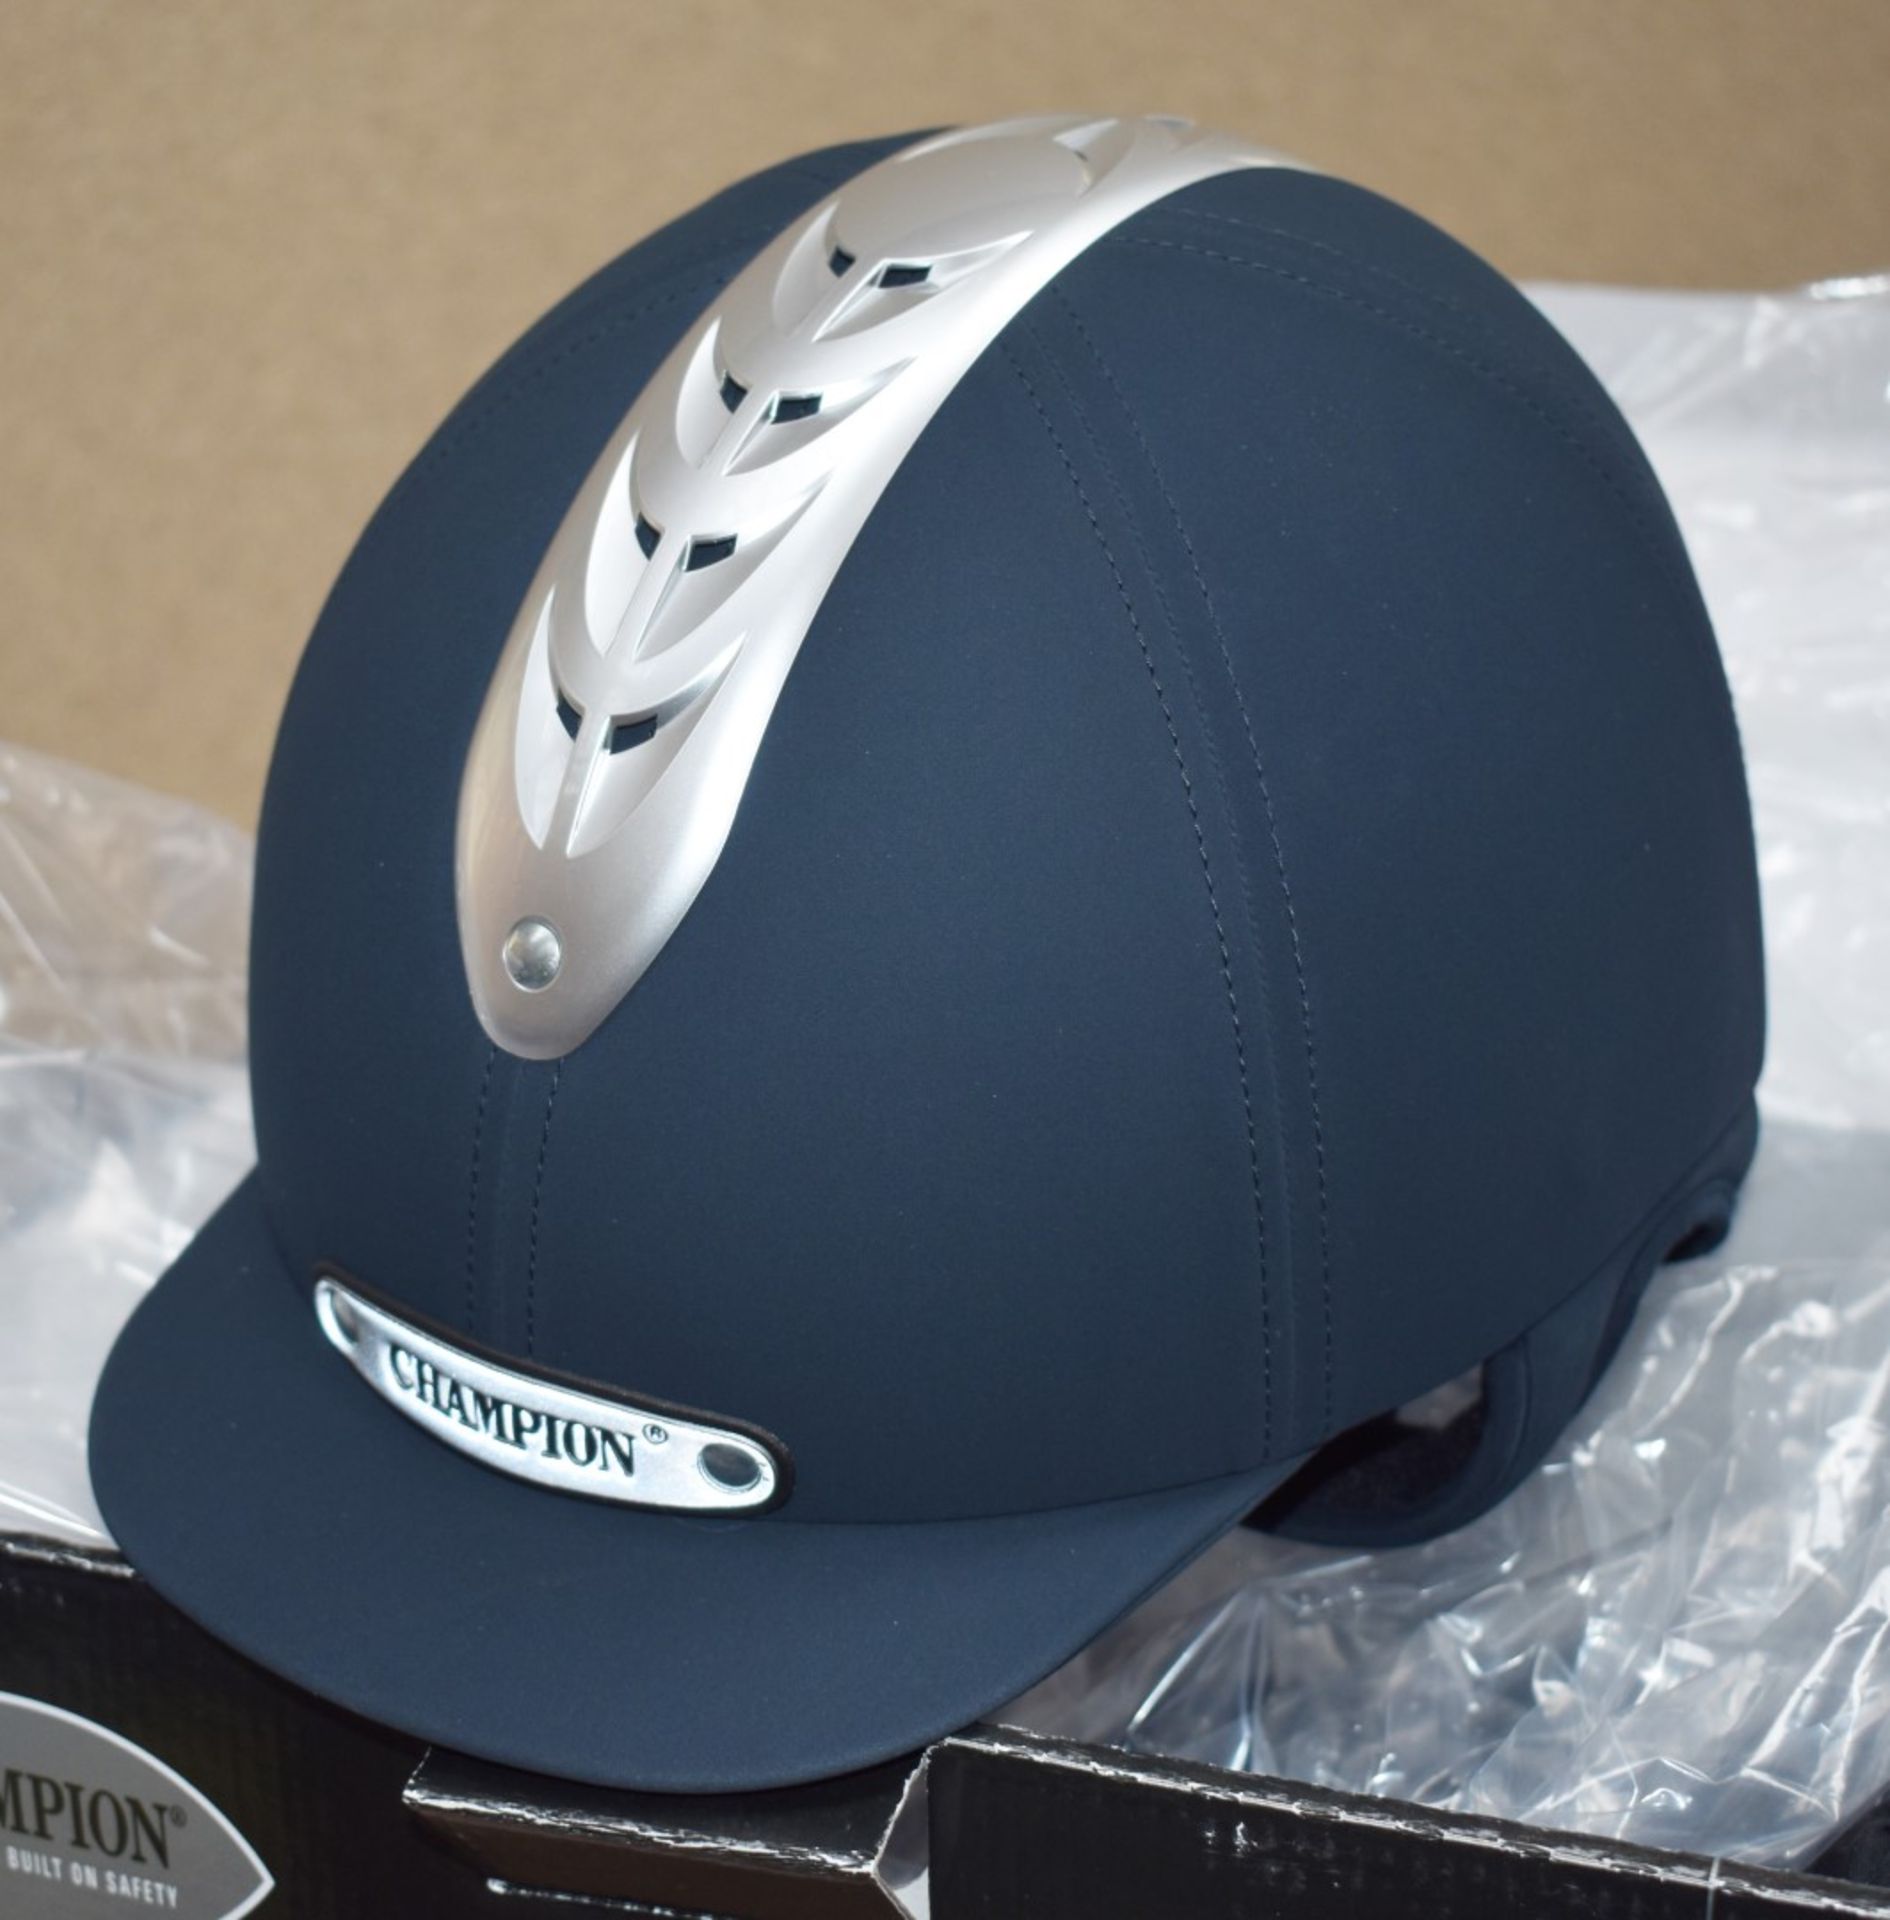 4 x Champion Ventair Evolution Horse Riding Hats - Various Sizes and Colours Included - Unused Boxed - Image 9 of 11